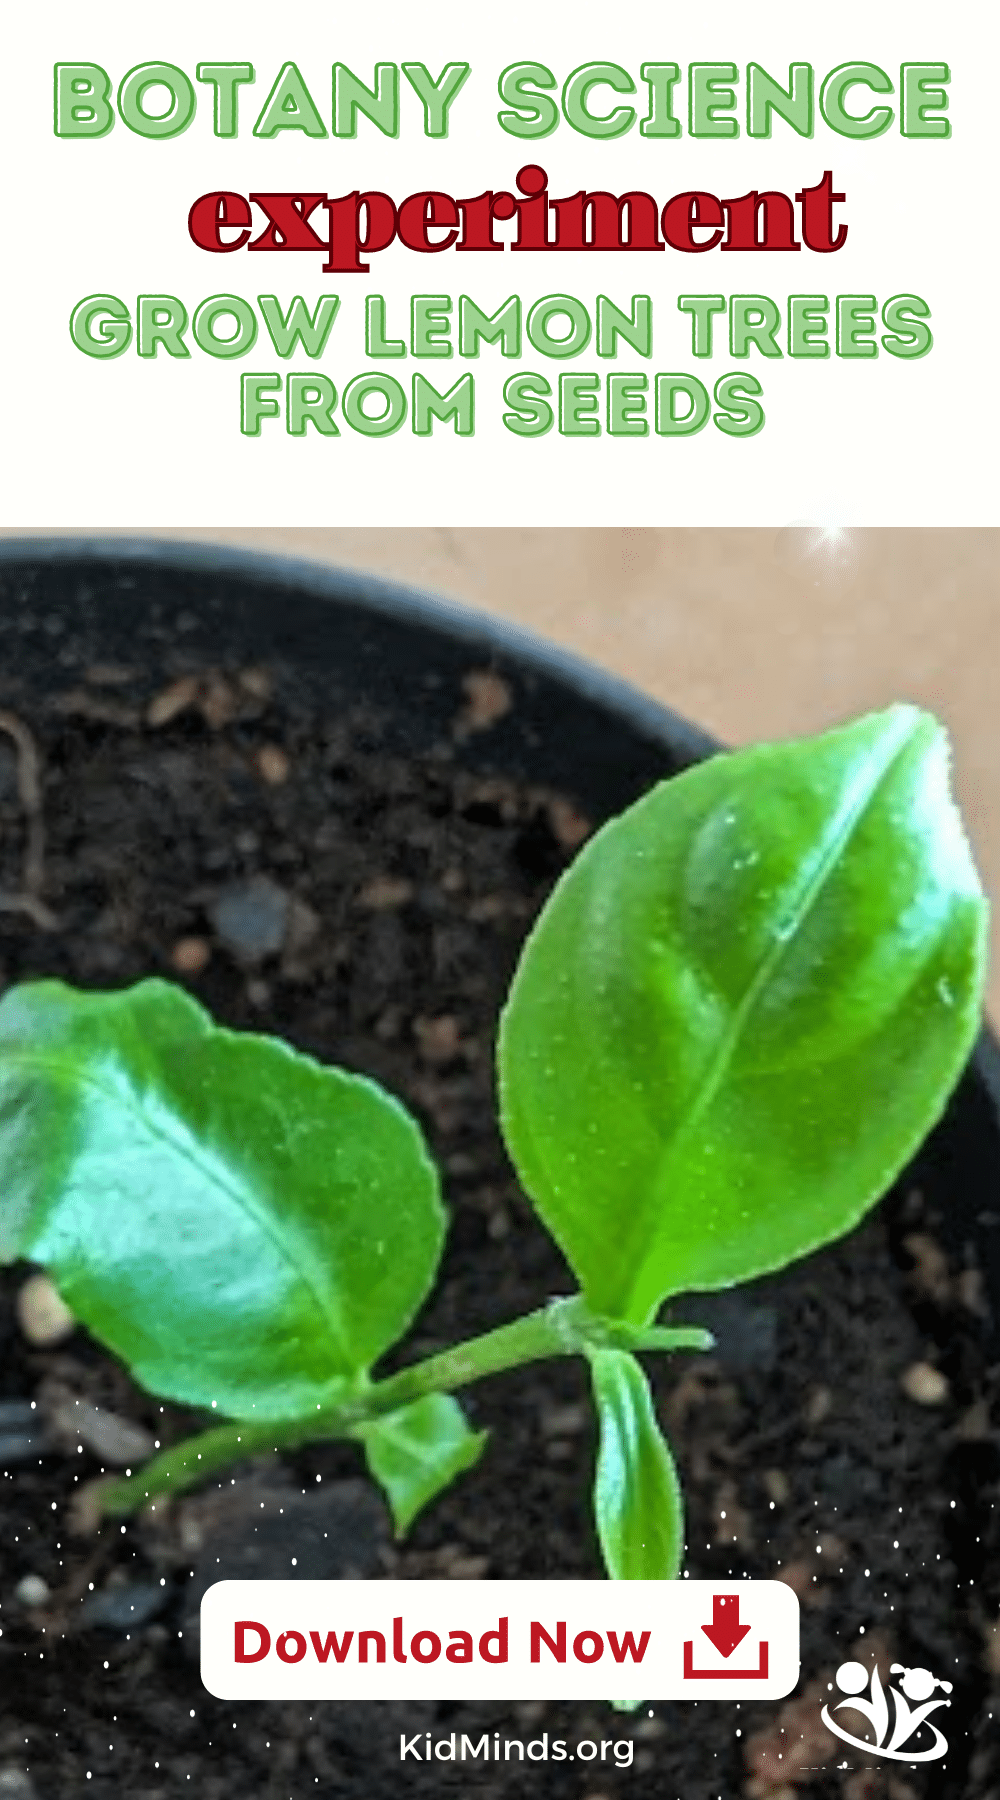 Let's explore how to turn a tiny lemon seed into a flourishing tree. Join us, and let's make learning a zestful adventure. #kidsactivities #lemontree #creativelearning #earlyeducation #STEM #STEAM #botany #science4kids #handsonlearning